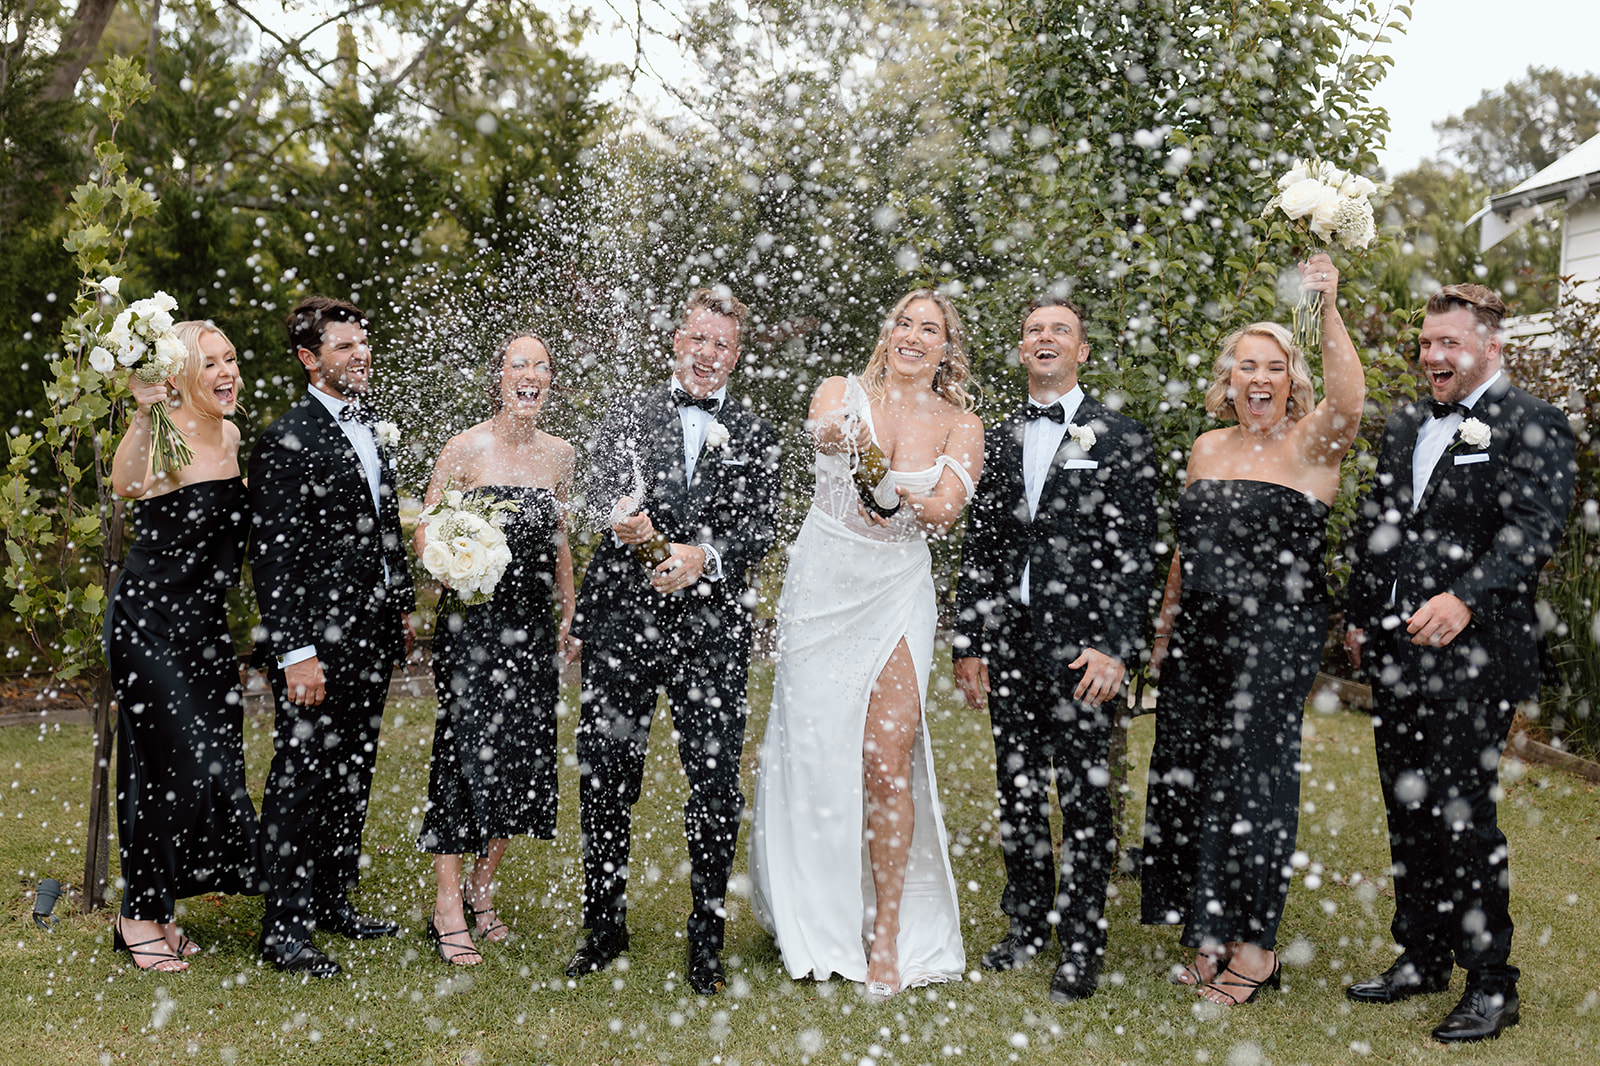 Couple with their bridal party during champagne shower at the wedding in the South Coast The Homestead Berry